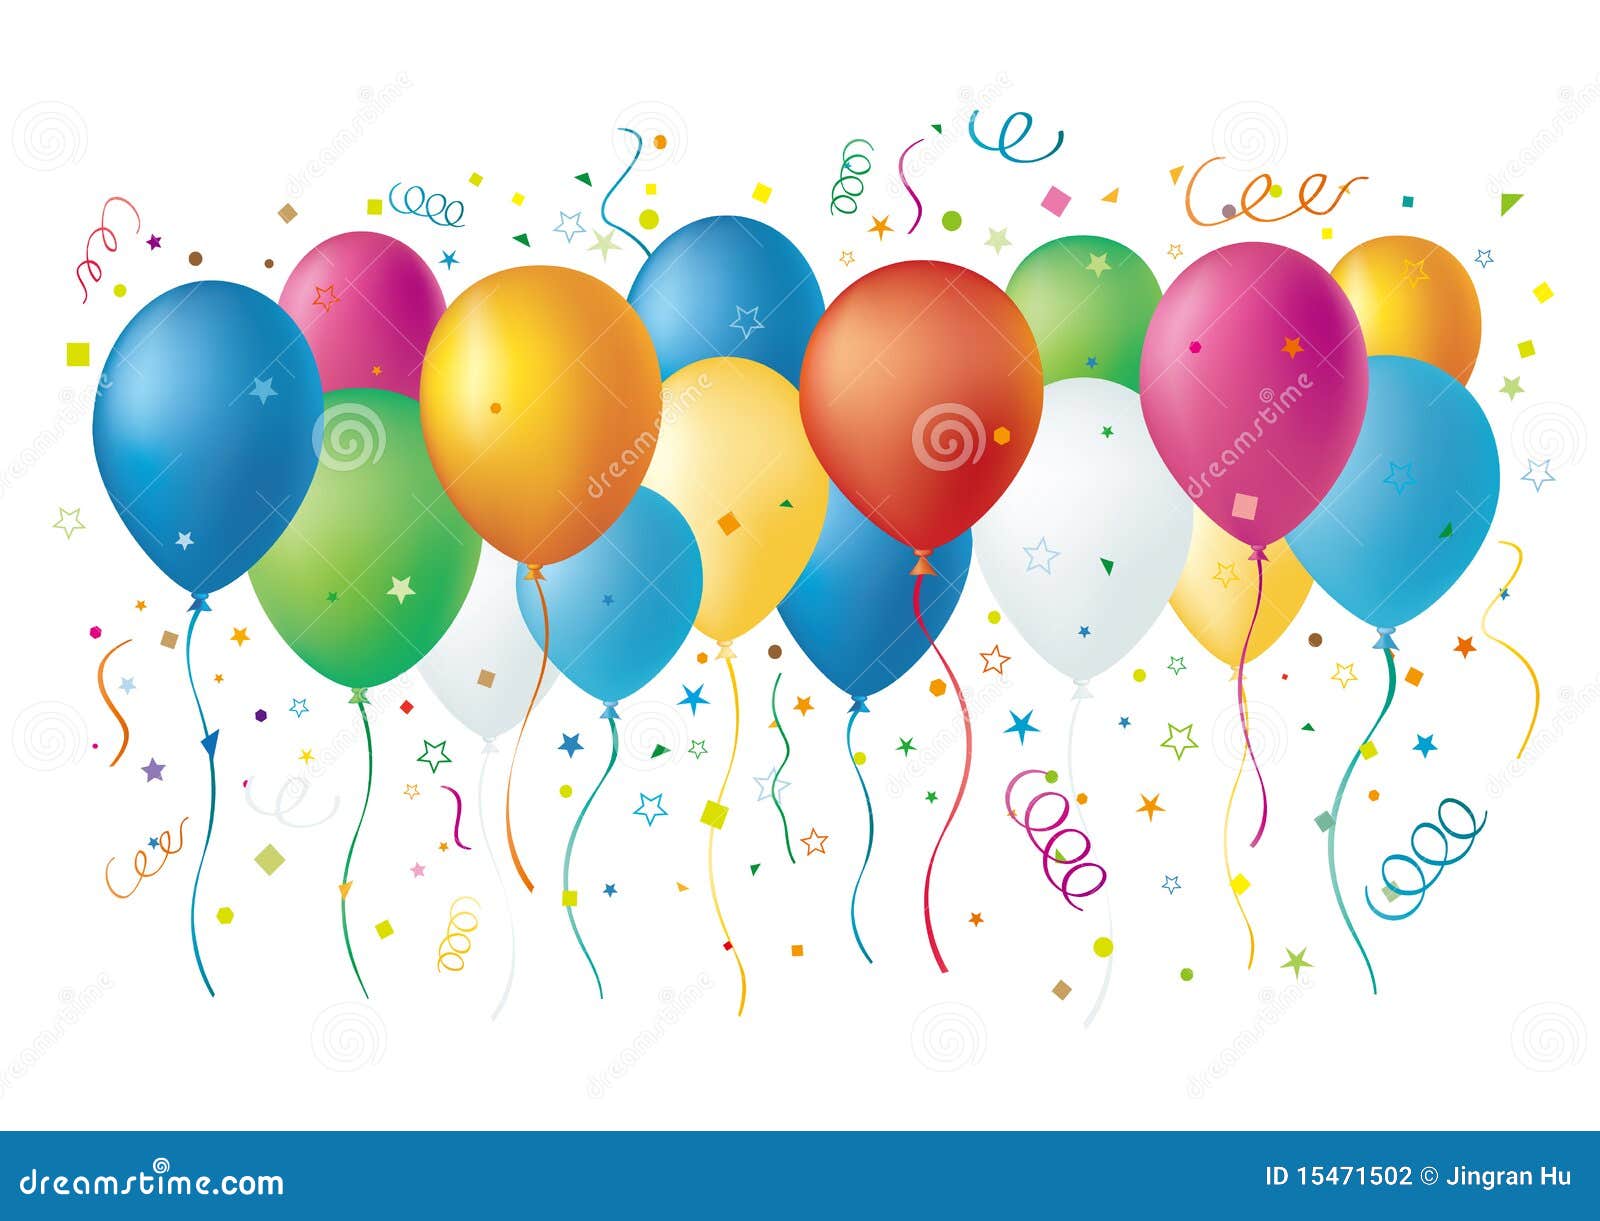 balloons and confetti clipart - photo #20